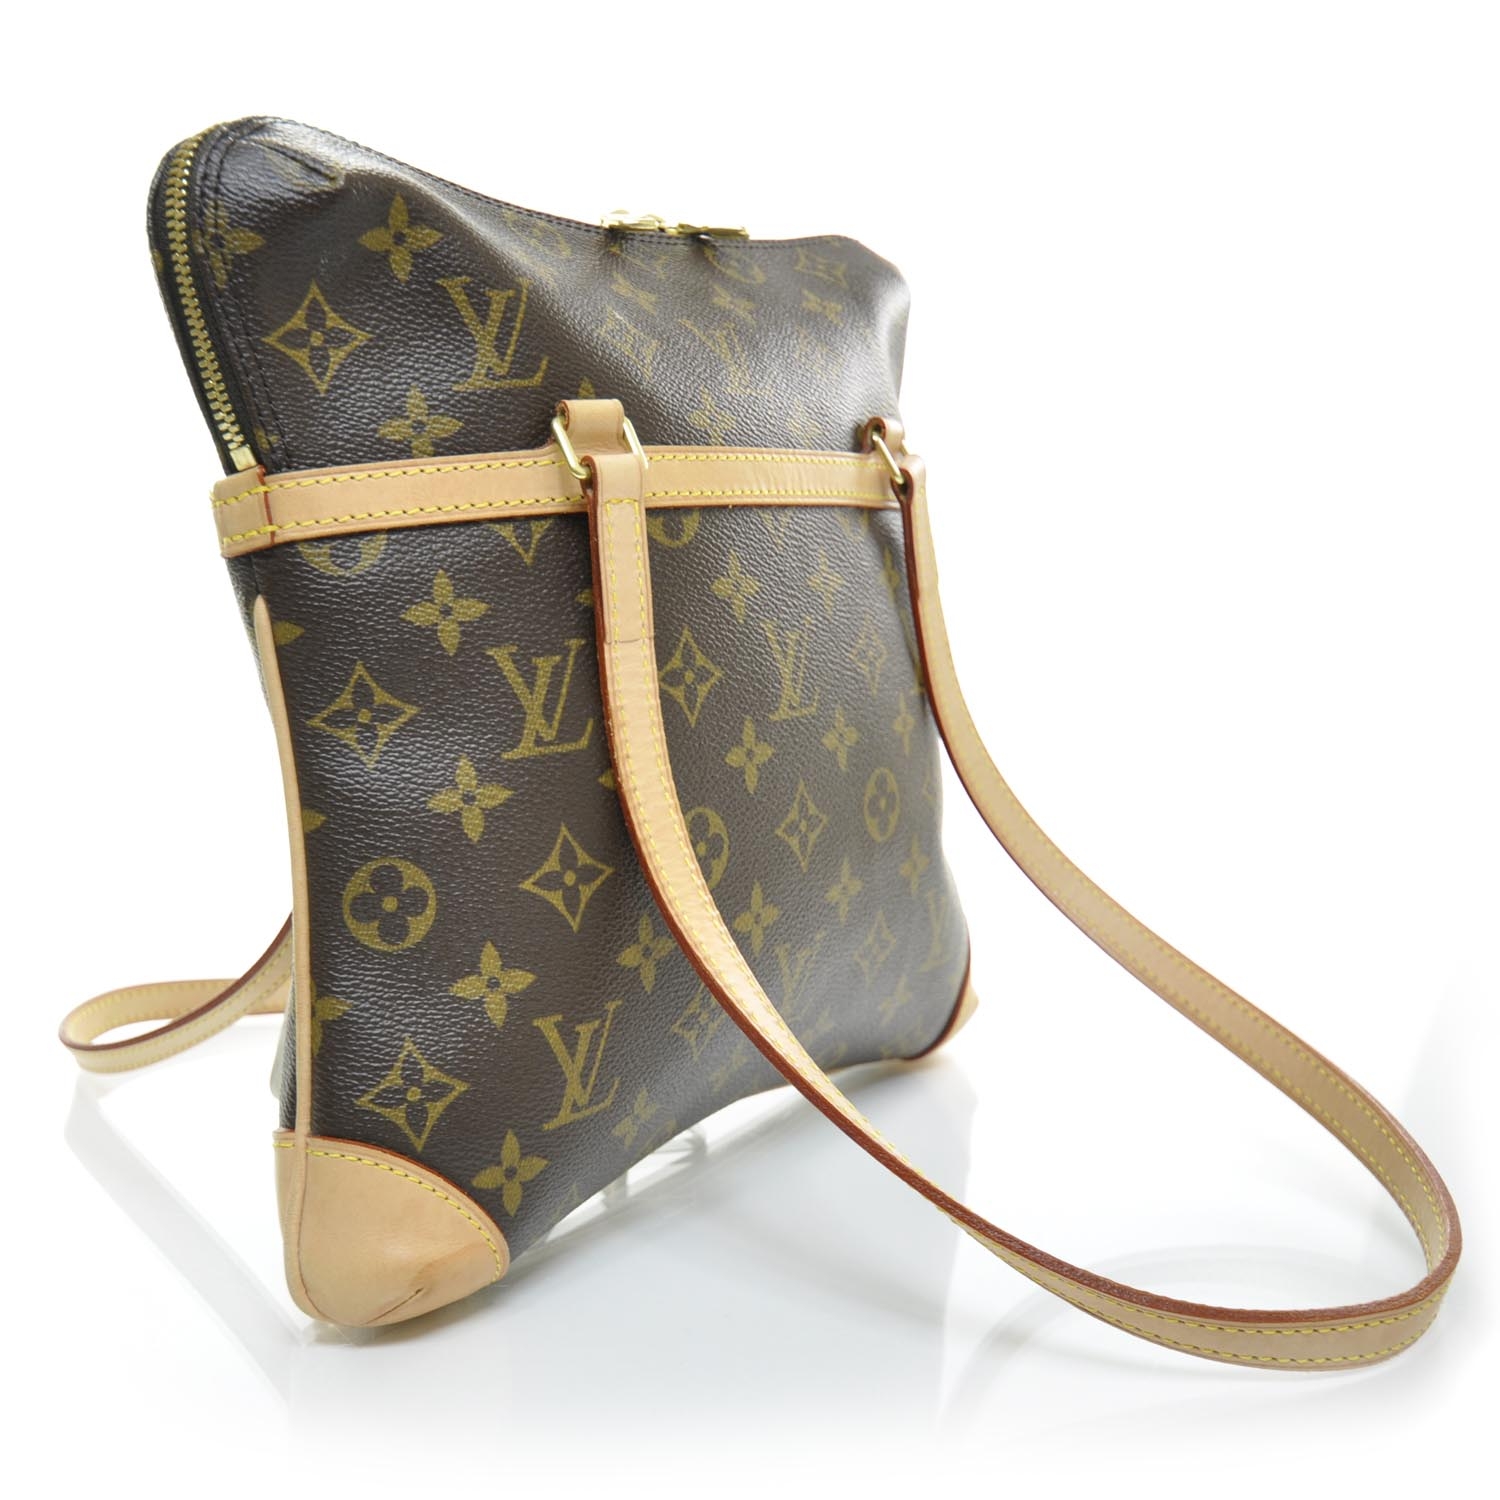 New Louis Vuitton Coussin Bag Stanford Center For Opportunity Policy In Education